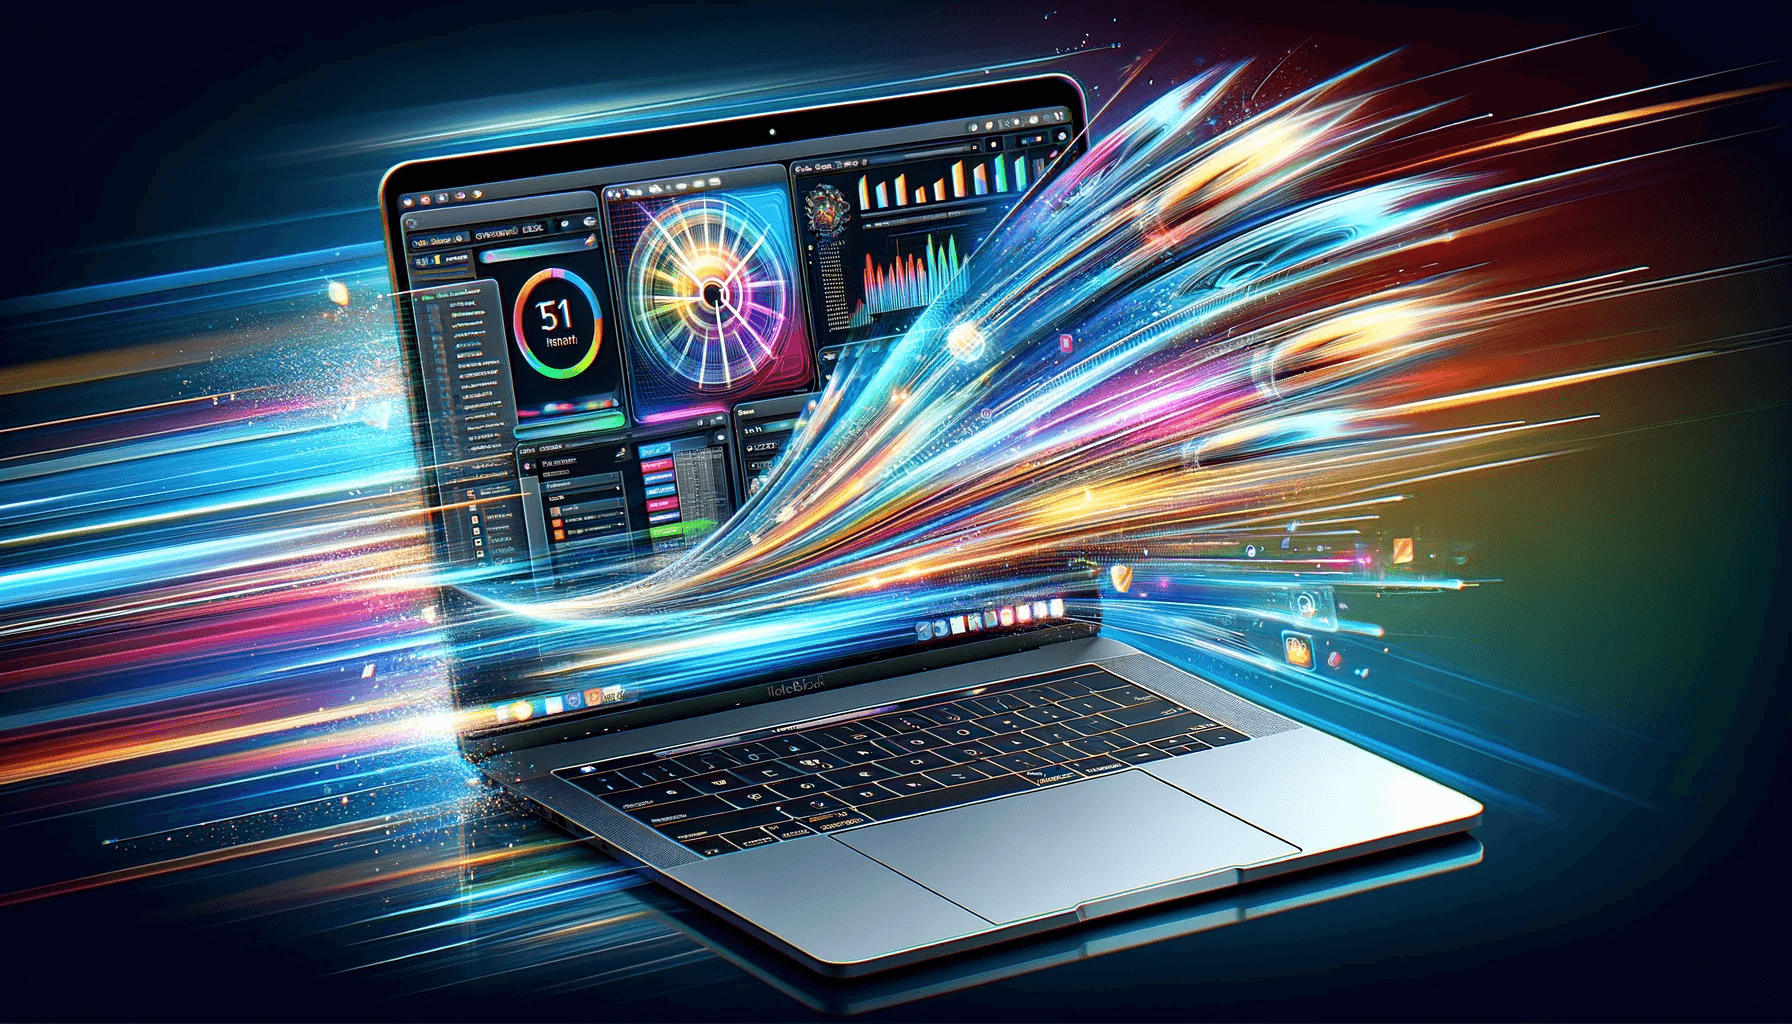 DALL·E 2023 12 21 17.30.15 A digital illustration of a MacBook working fast with a colorful background. The MacBook is open displaying its high resolution screen with dynamic